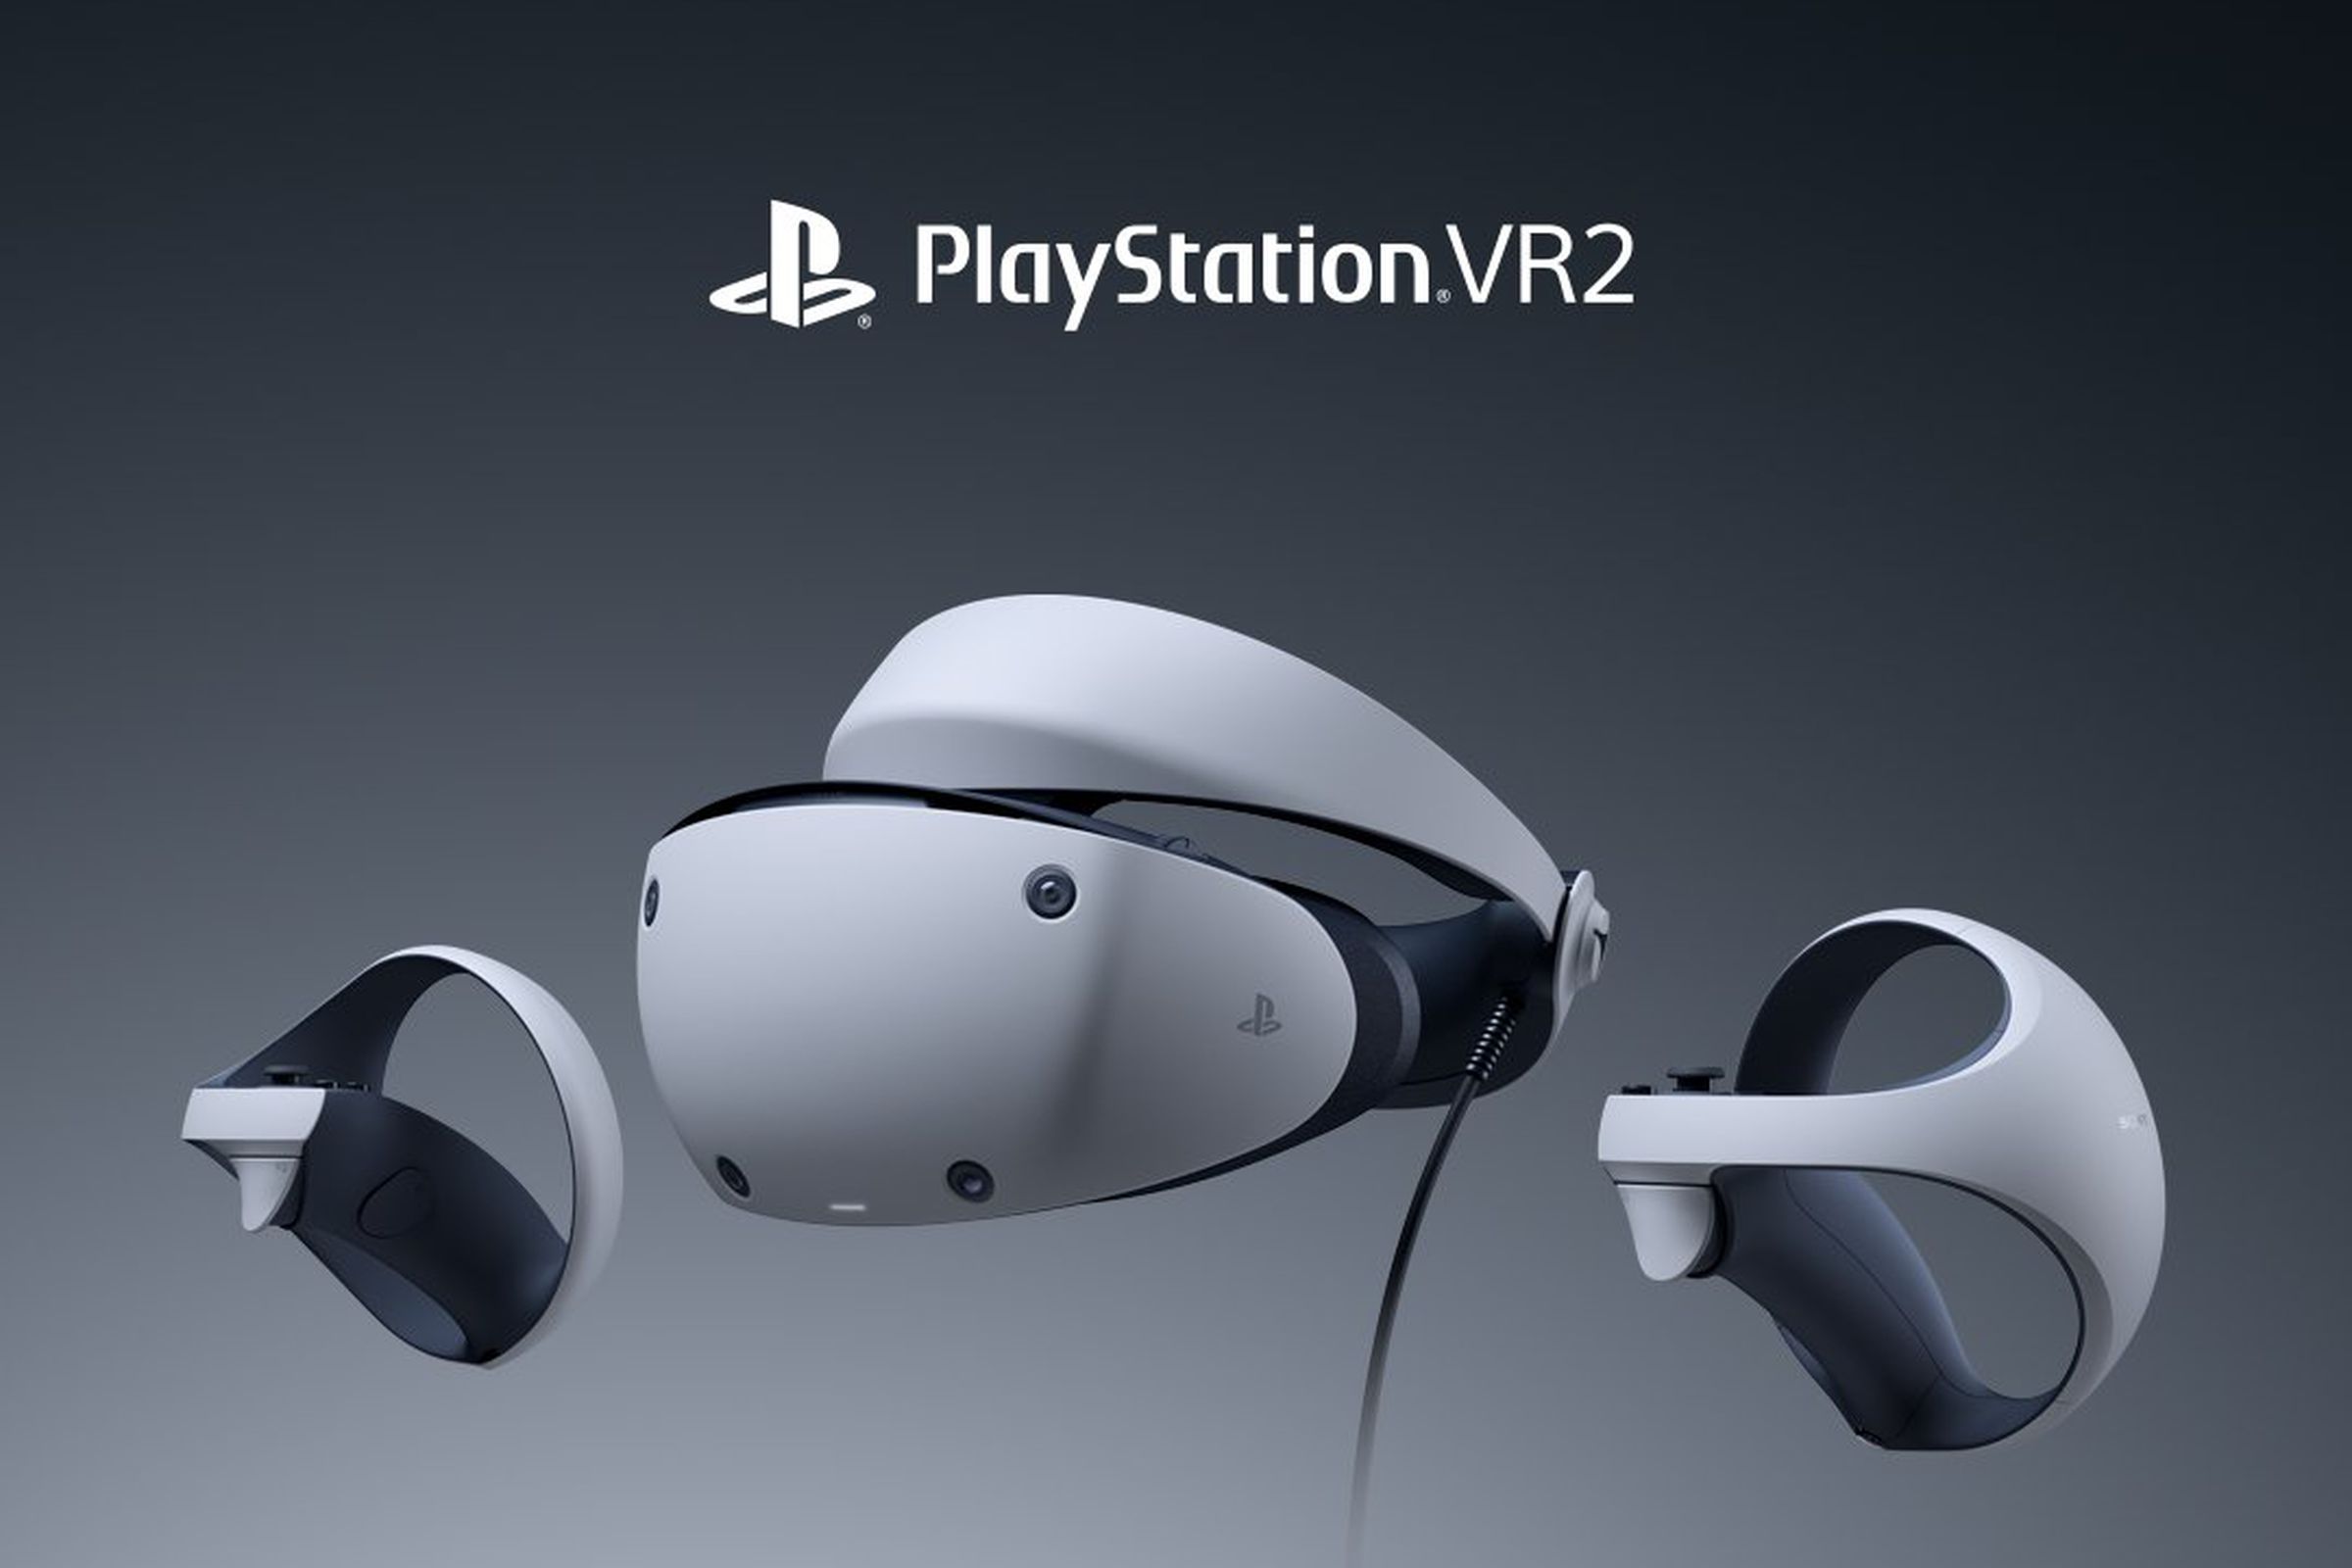 The PlayStation VR 2.